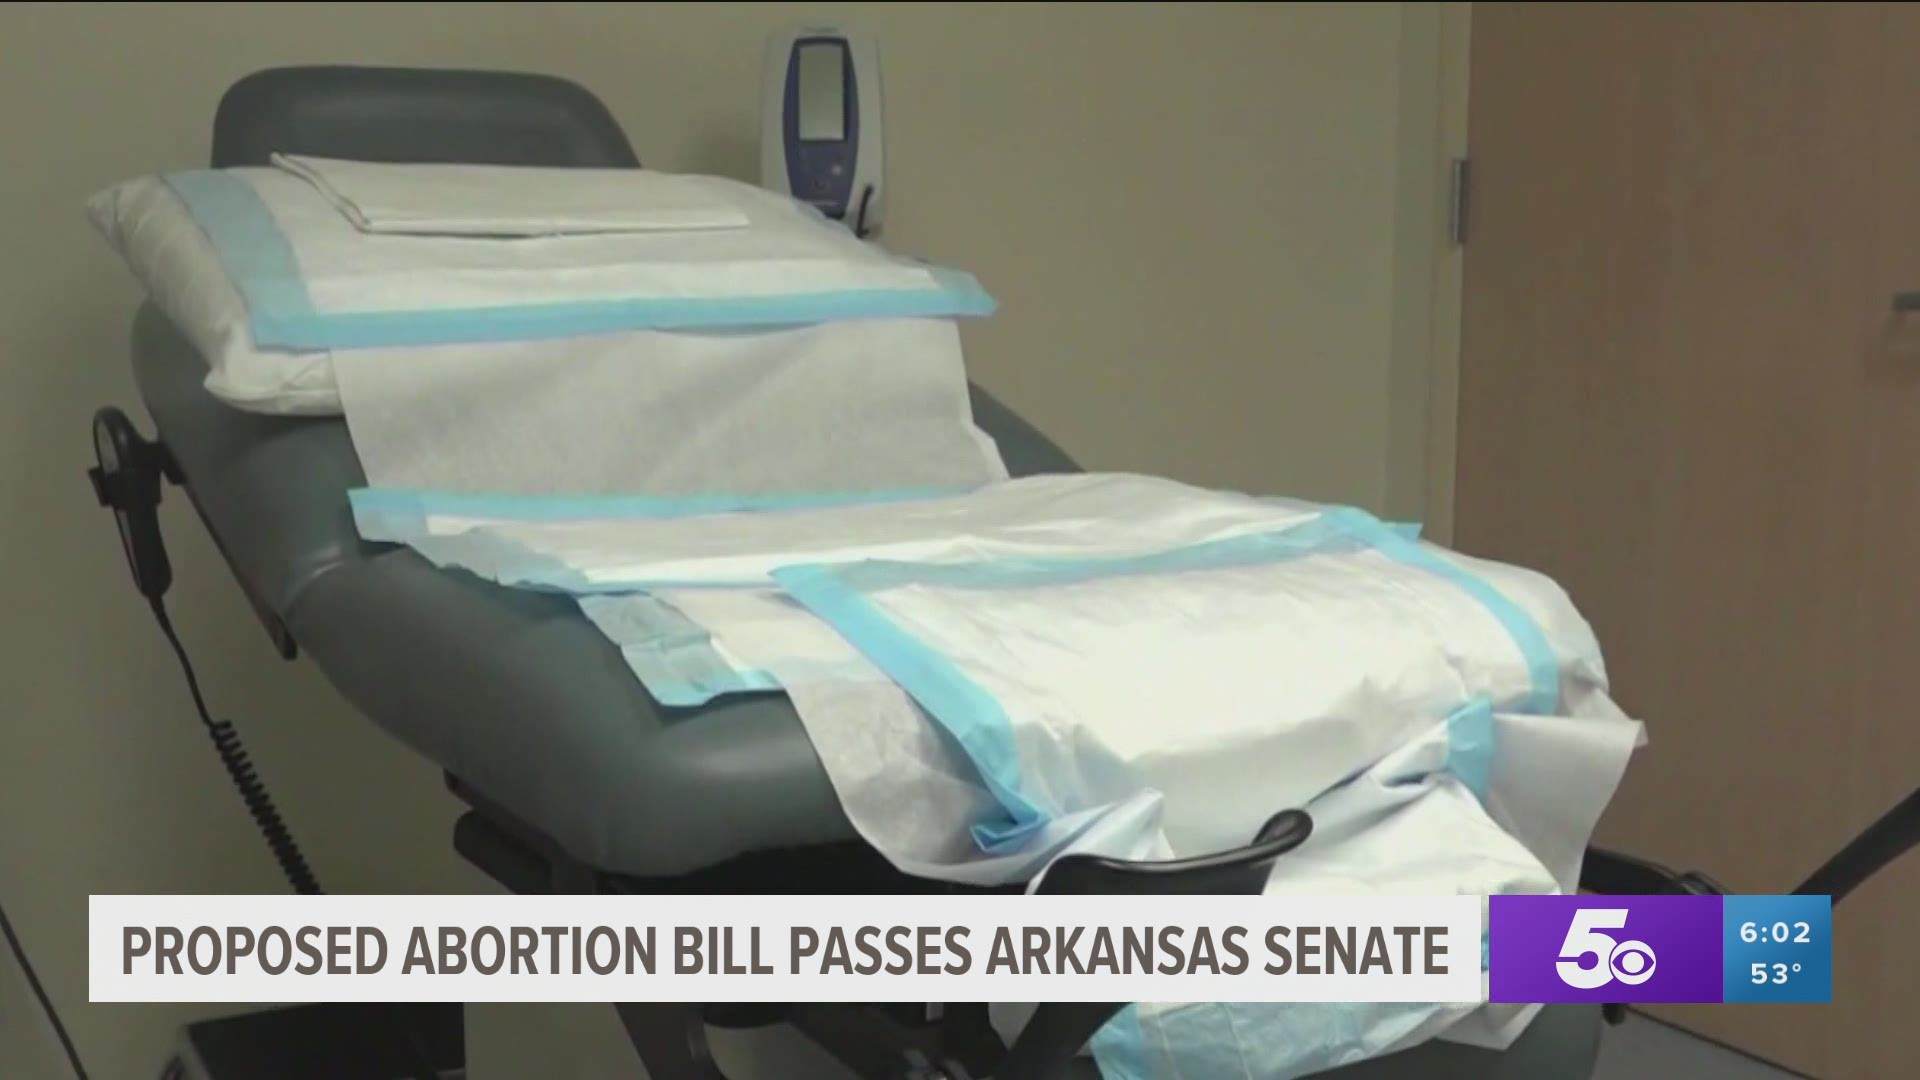 A bill proposed by Sen. Jason Rapert that would make abortion virtually illegal except to save the life of the mother has passed the Arkansas Senate.